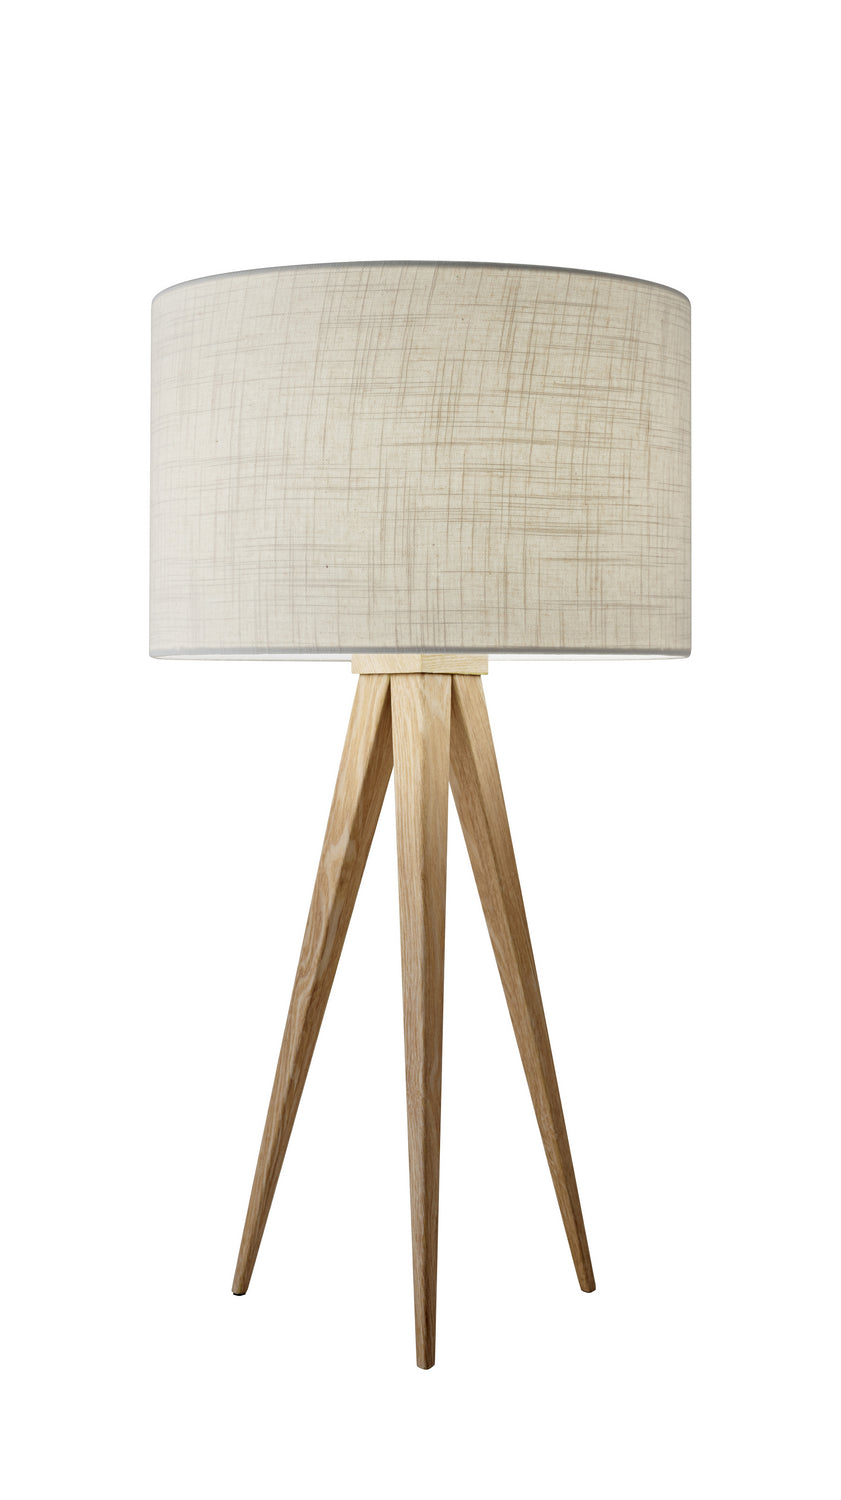 Adesso Home 6423-12 Modern Director Lamp Natural Wood